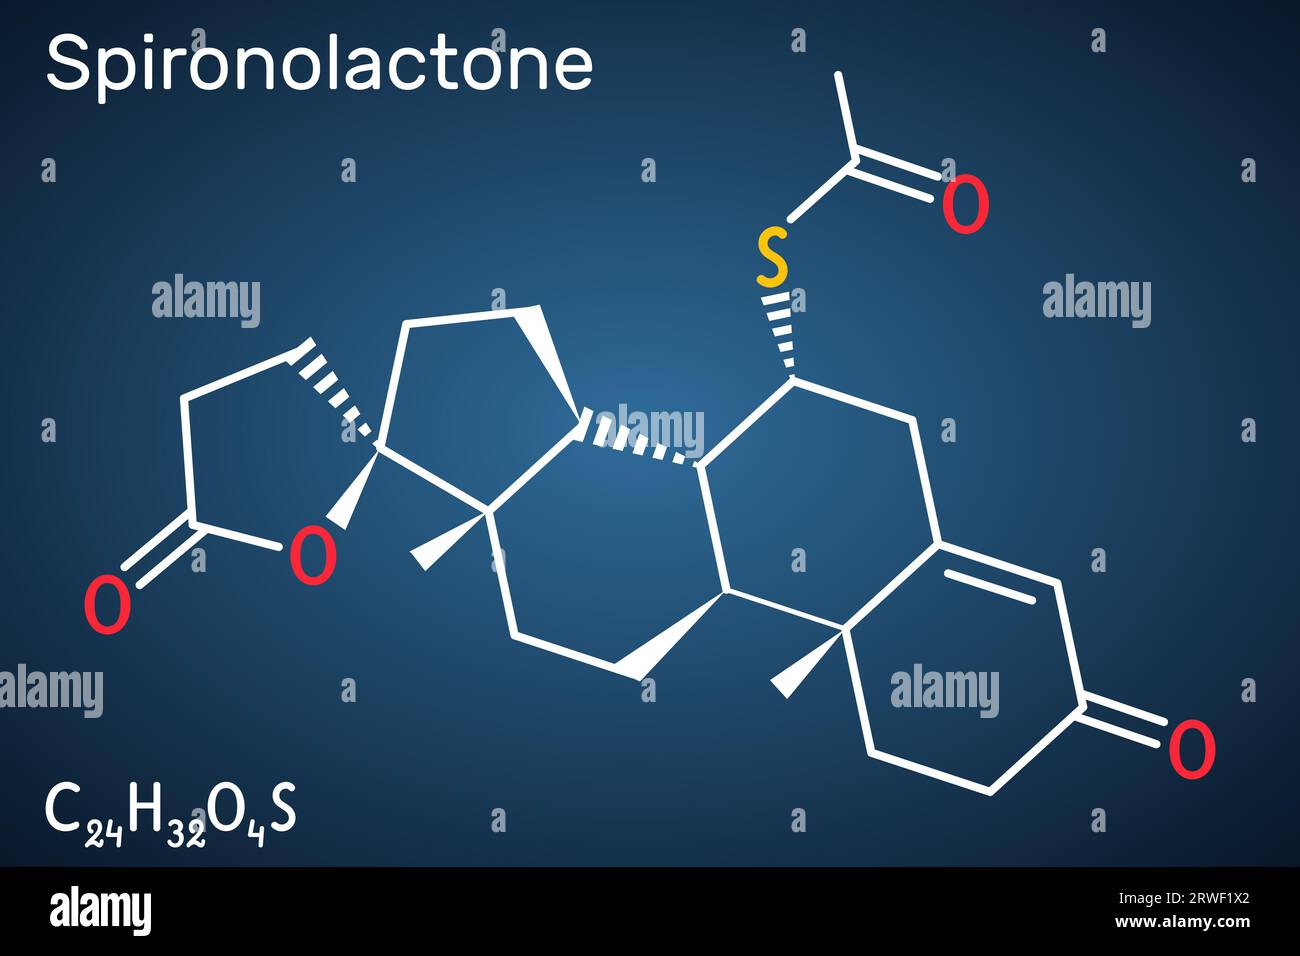 Spironolactone molecule. It is aldosterone receptor antagonist used for the treatment of hypertension, hyperaldosteronism, edema. Structural chemical Stock Vector